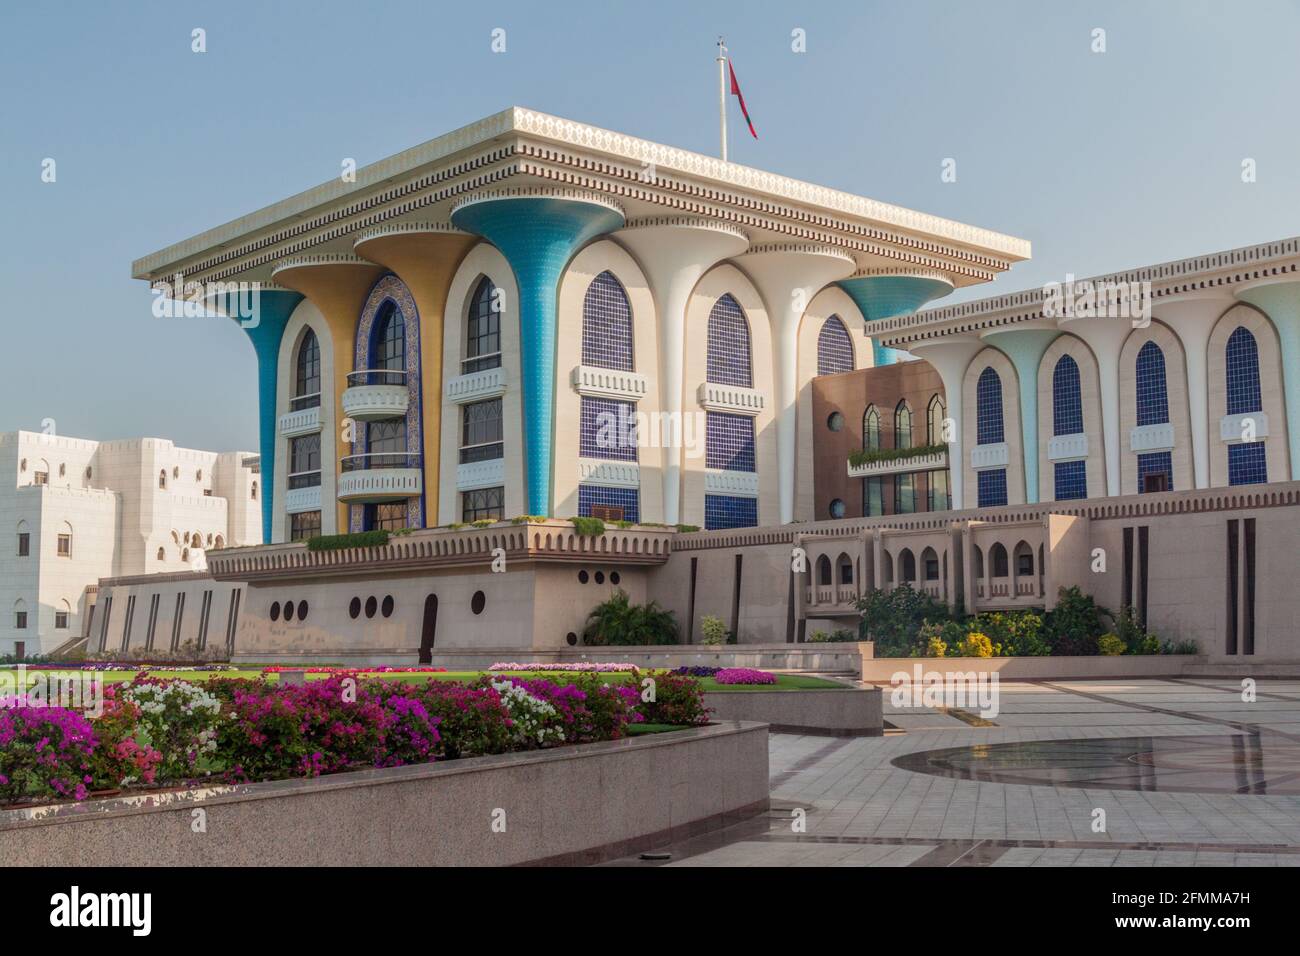 Al Alam palace ceremonial palace of Sultan Qaboos in Muscat, Oman Stock Photo